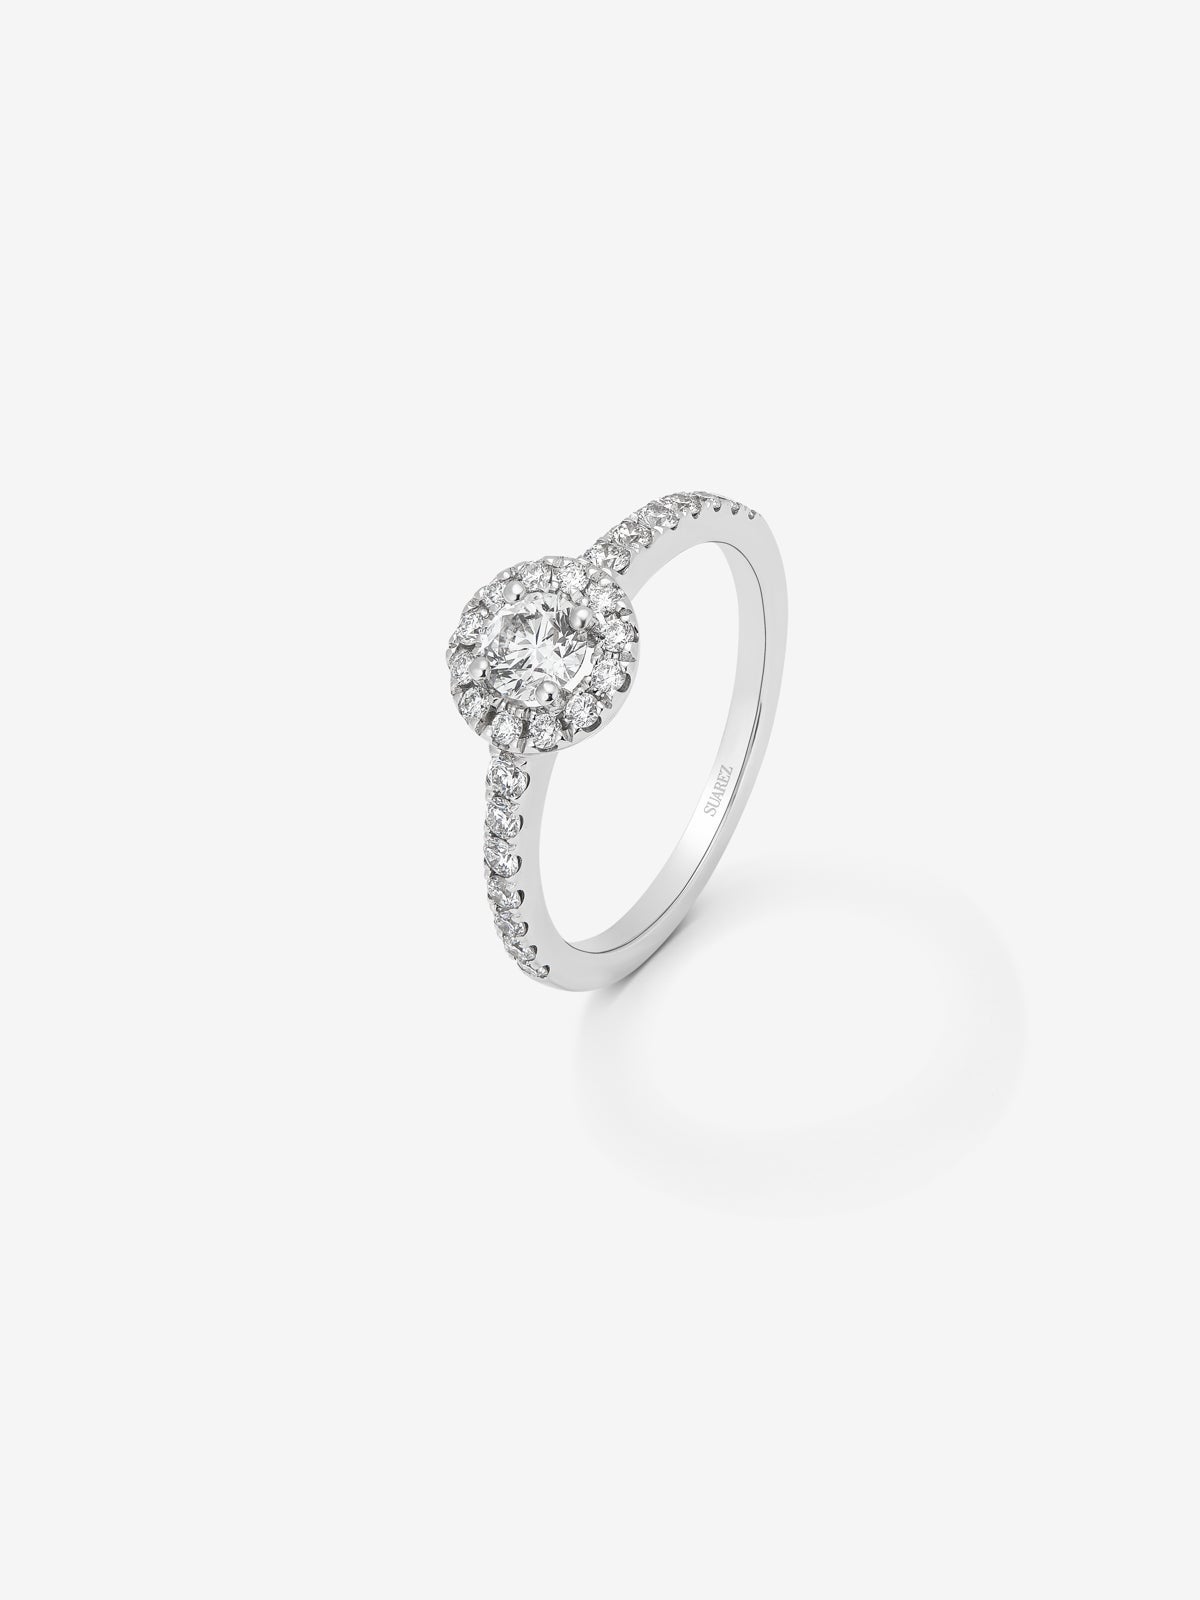 18K white gold solitaire engagement ring with diamond